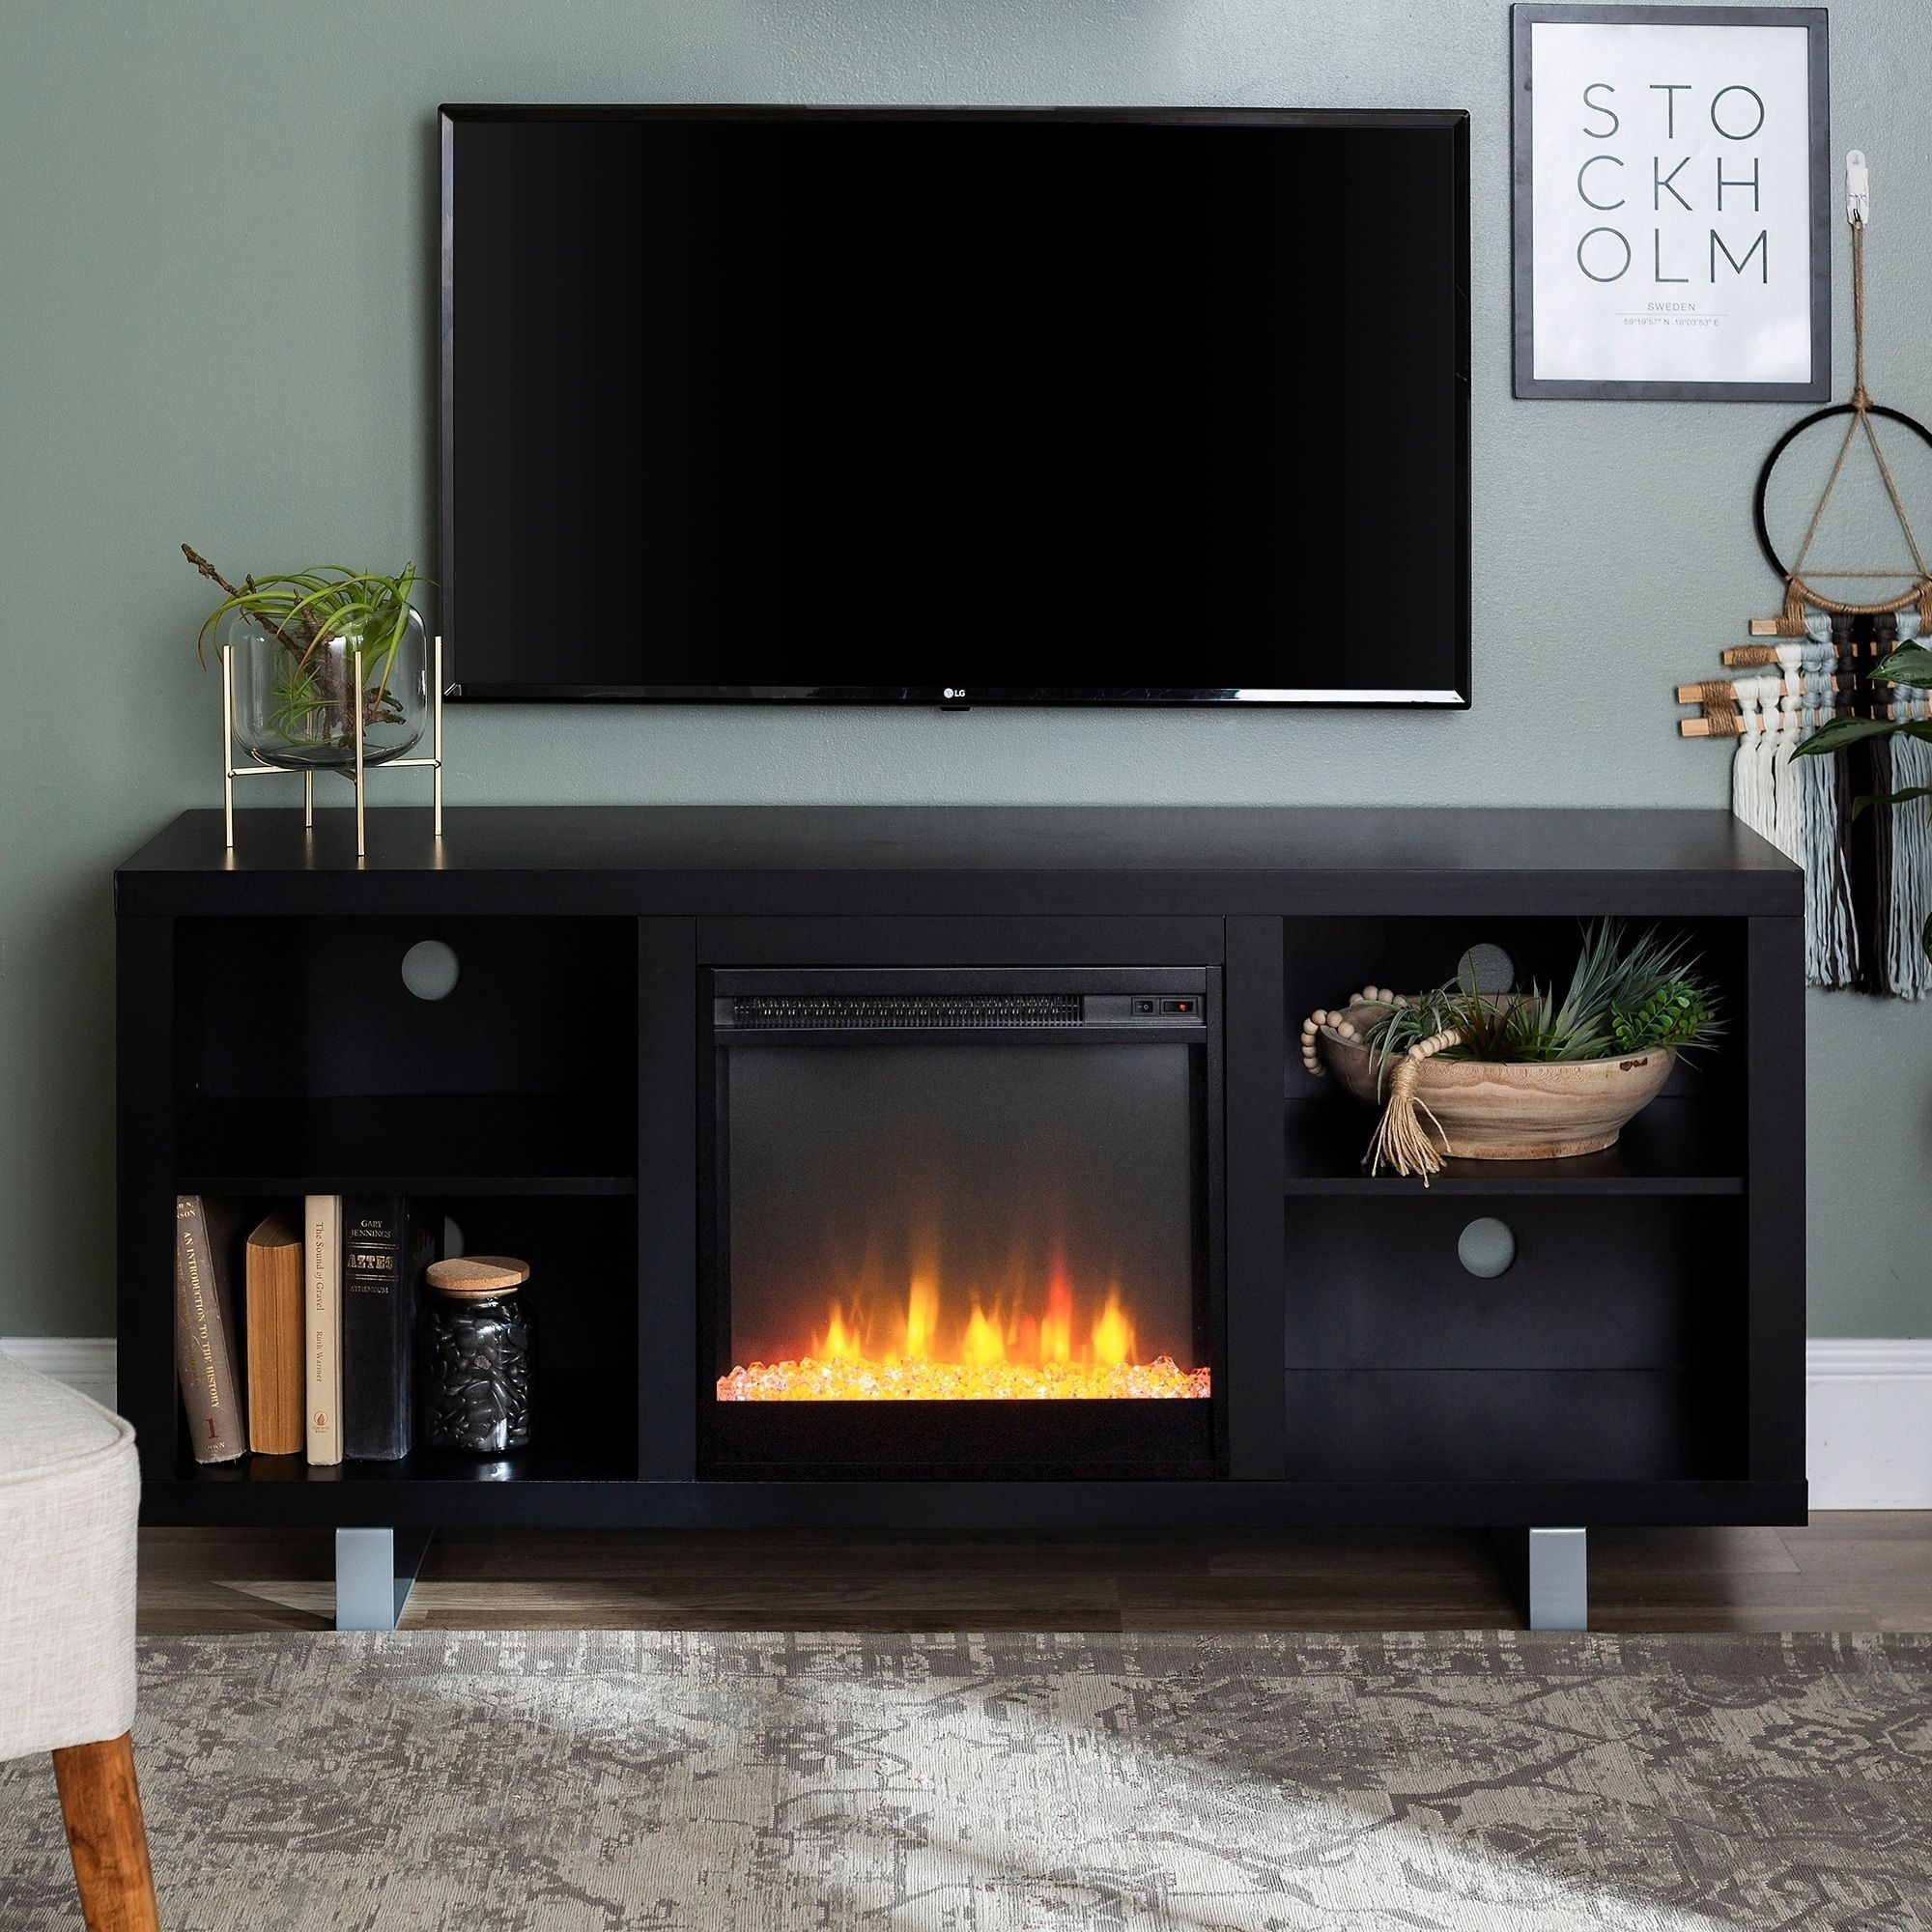 Middlebrook Designs 58 Inch Modern Fireplace Tv Stand Regarding Simple Open Storage Shelf Corner Tv Stands (View 6 of 15)